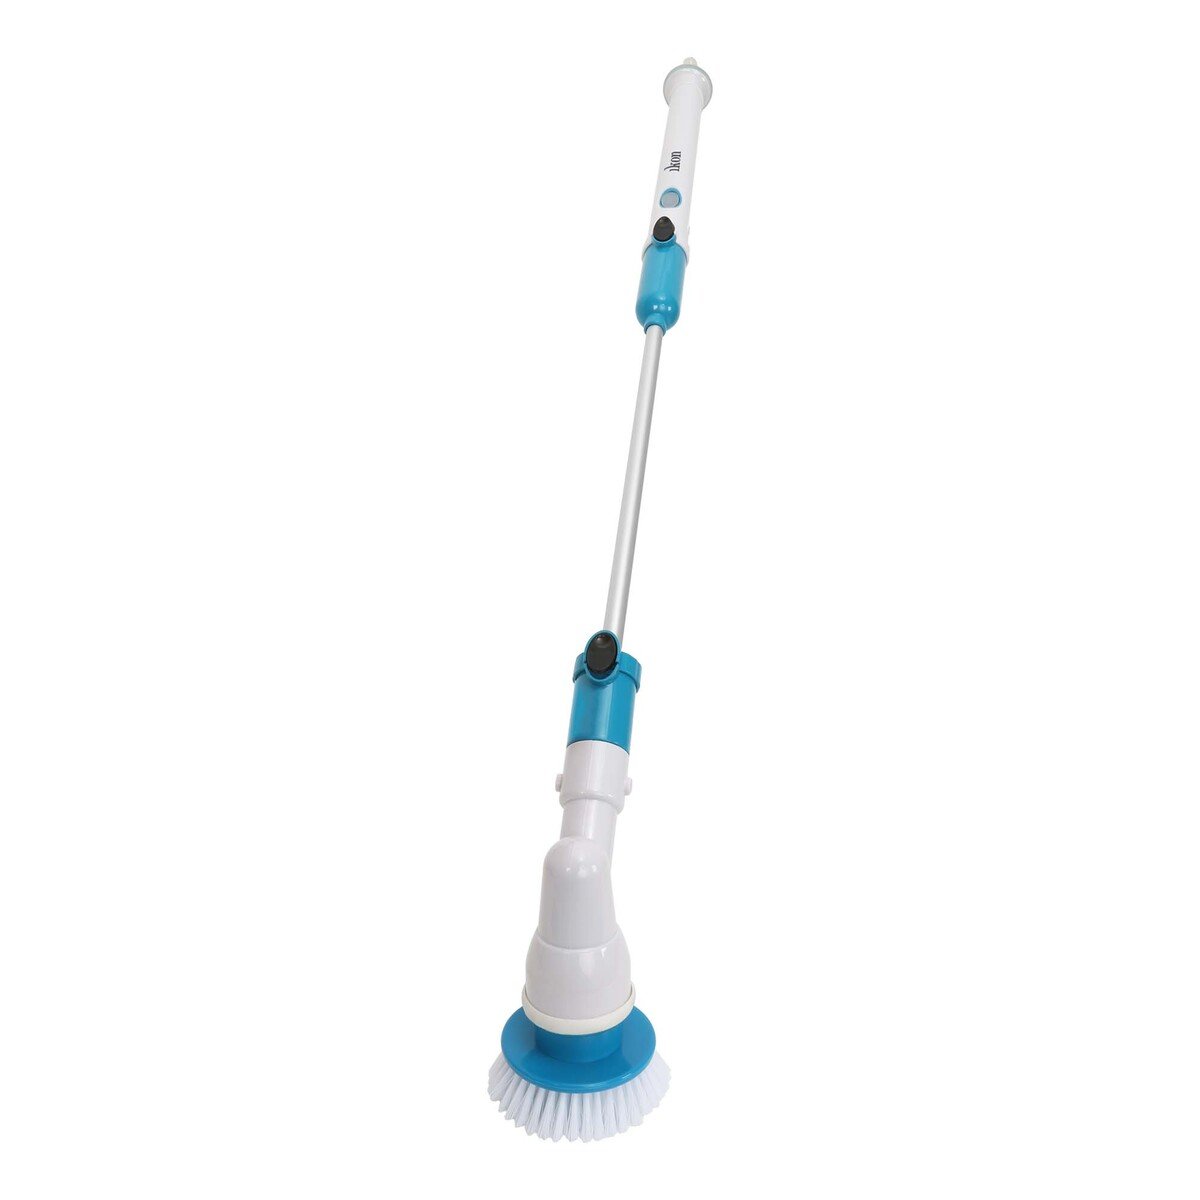 Ikon Rechargeable Spin Scrubber IK-016